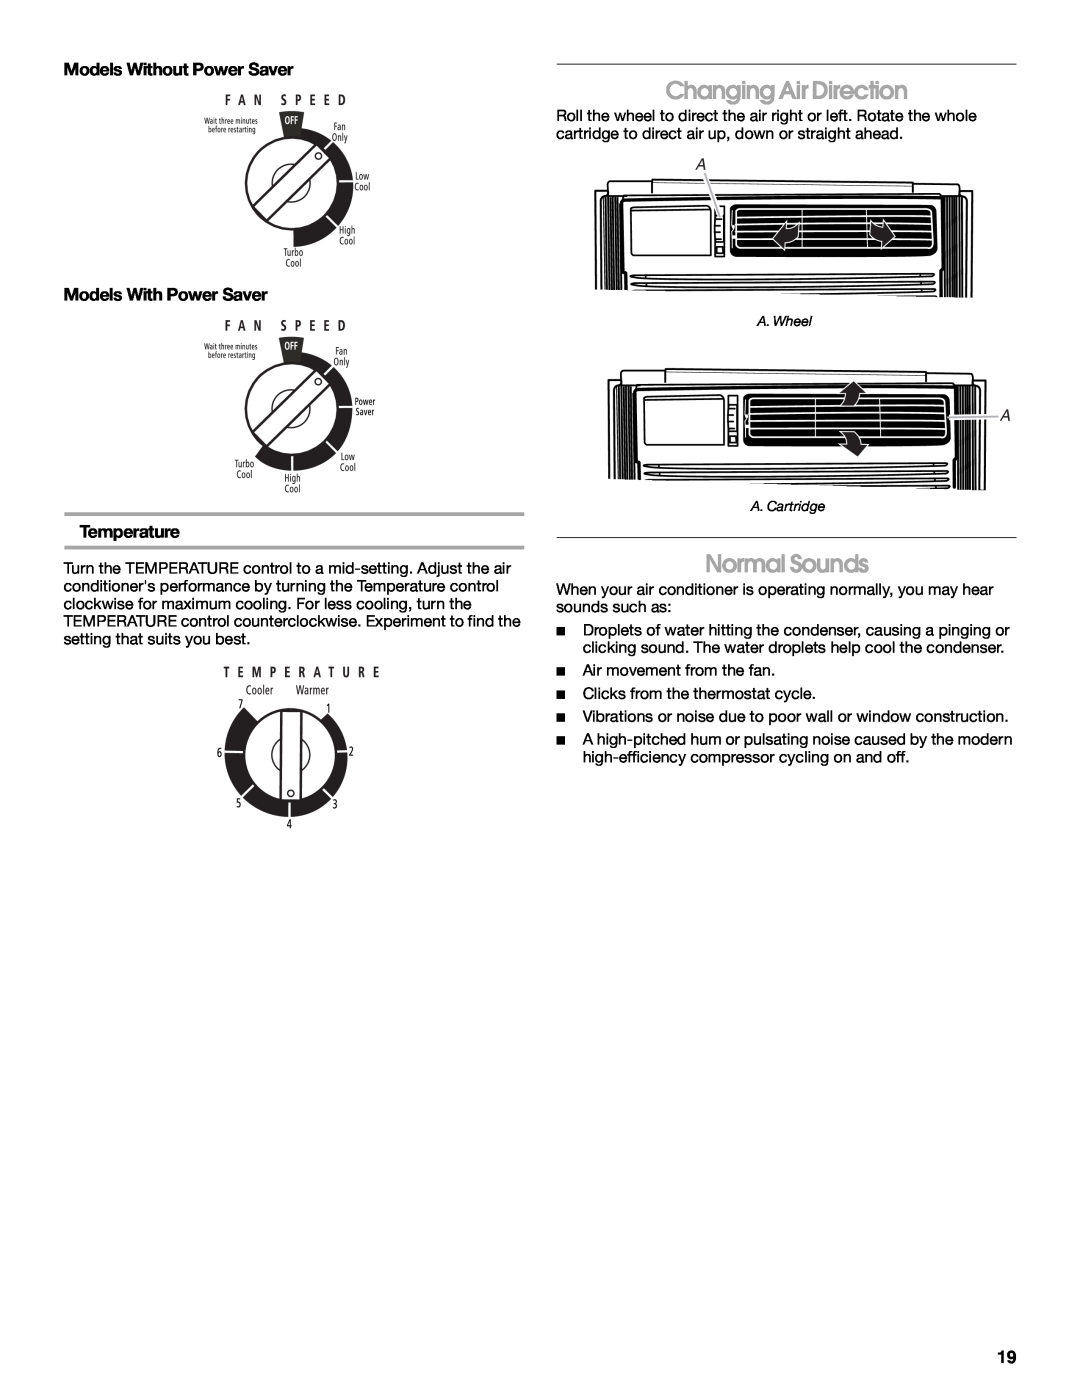 Whirlpool CA15WYR0 Changing Air Direction, Normal Sounds, Models With Power Saver Temperature, Models Without Power Saver 